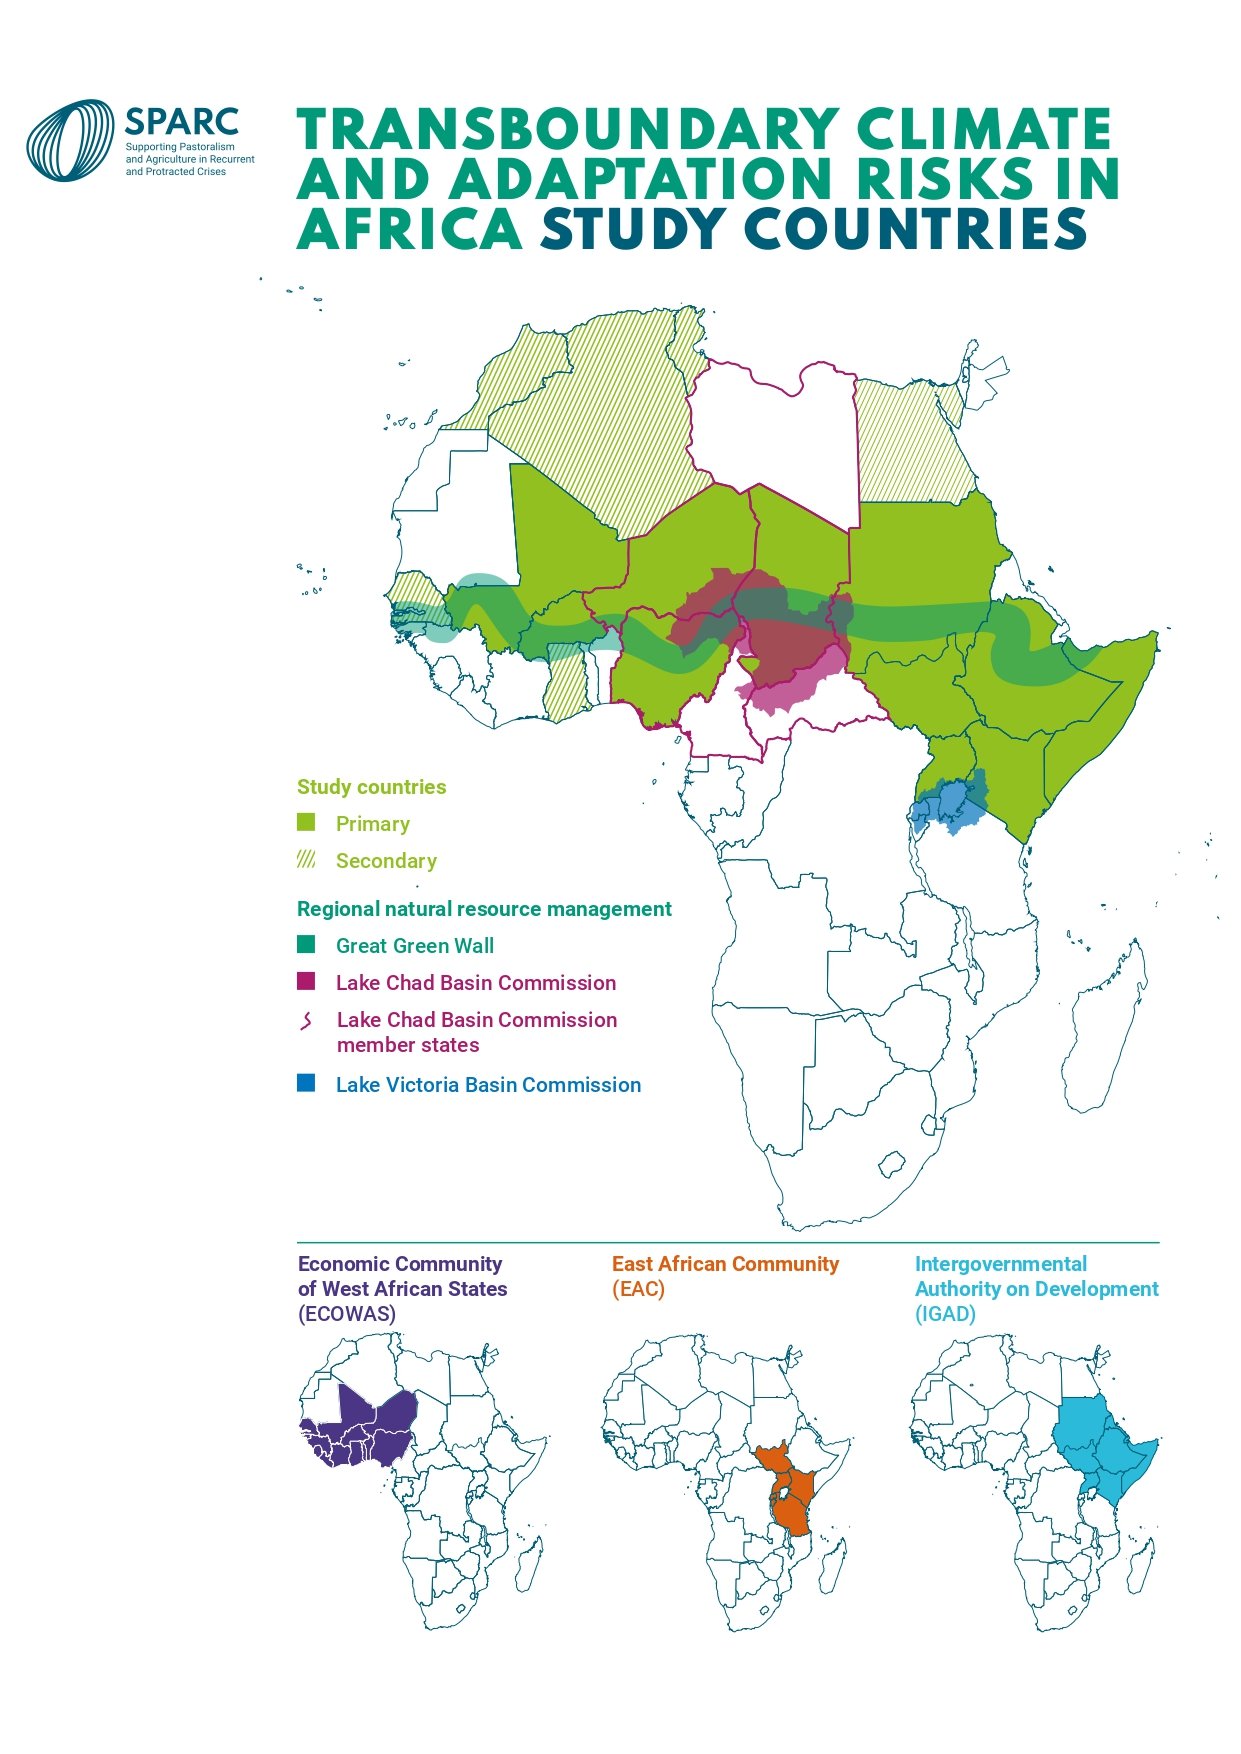 Transboundary climate risks in Africa Study countries_Produced as part of SPARC